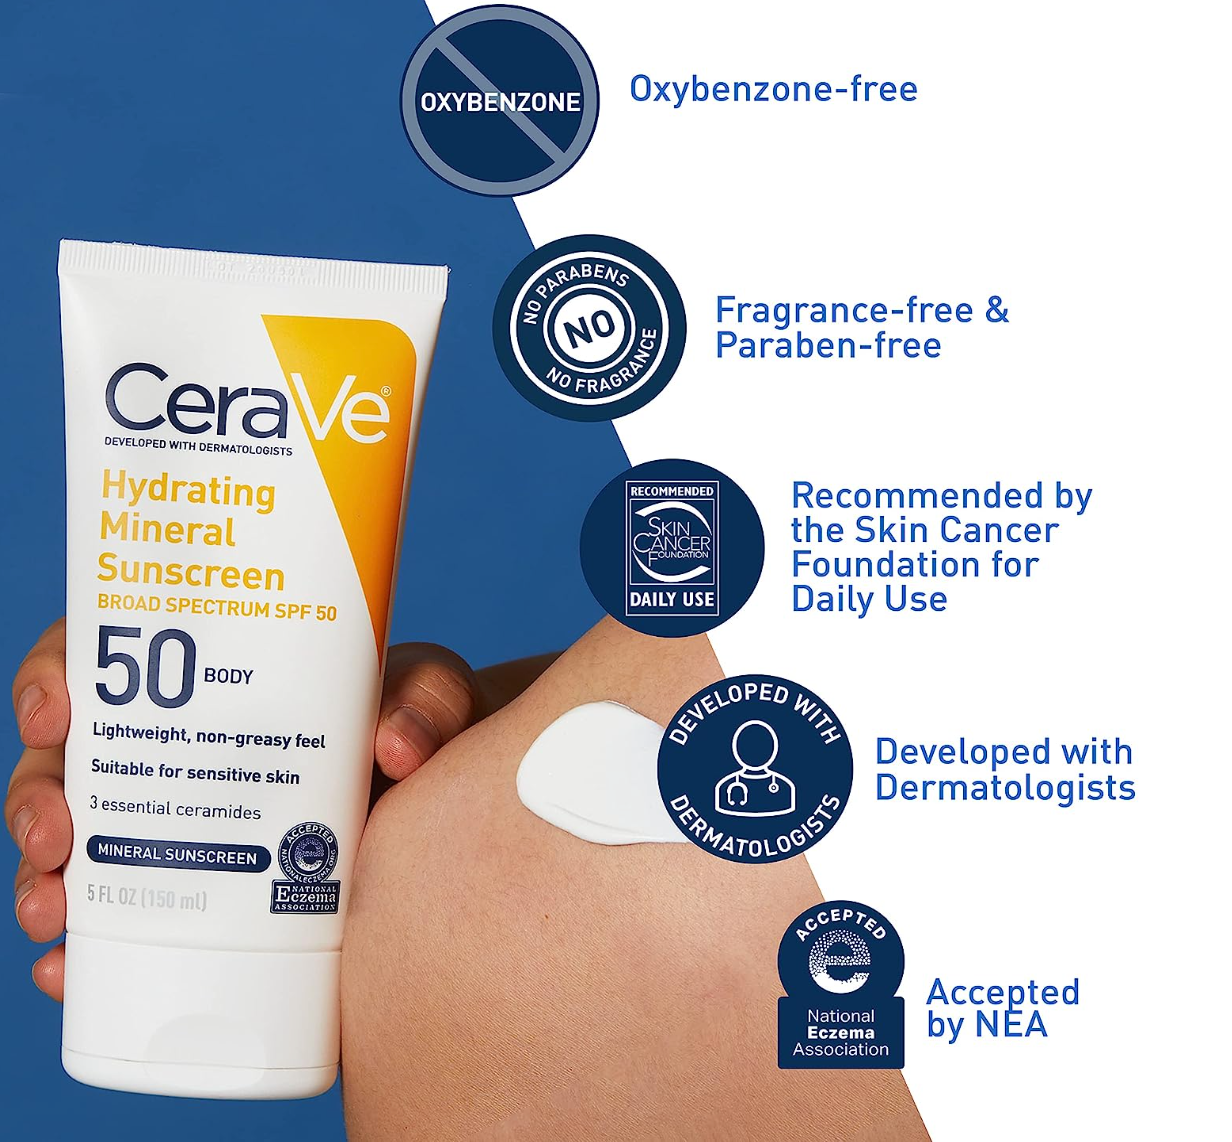 CeraVe 100% Mineral Sunscreen SPF 50 | Body Sunscreen with Zinc Oxide & Titanium Dioxide for Sensitive Skin | With Hyaluronic Acid and Ceramides | 5 oz